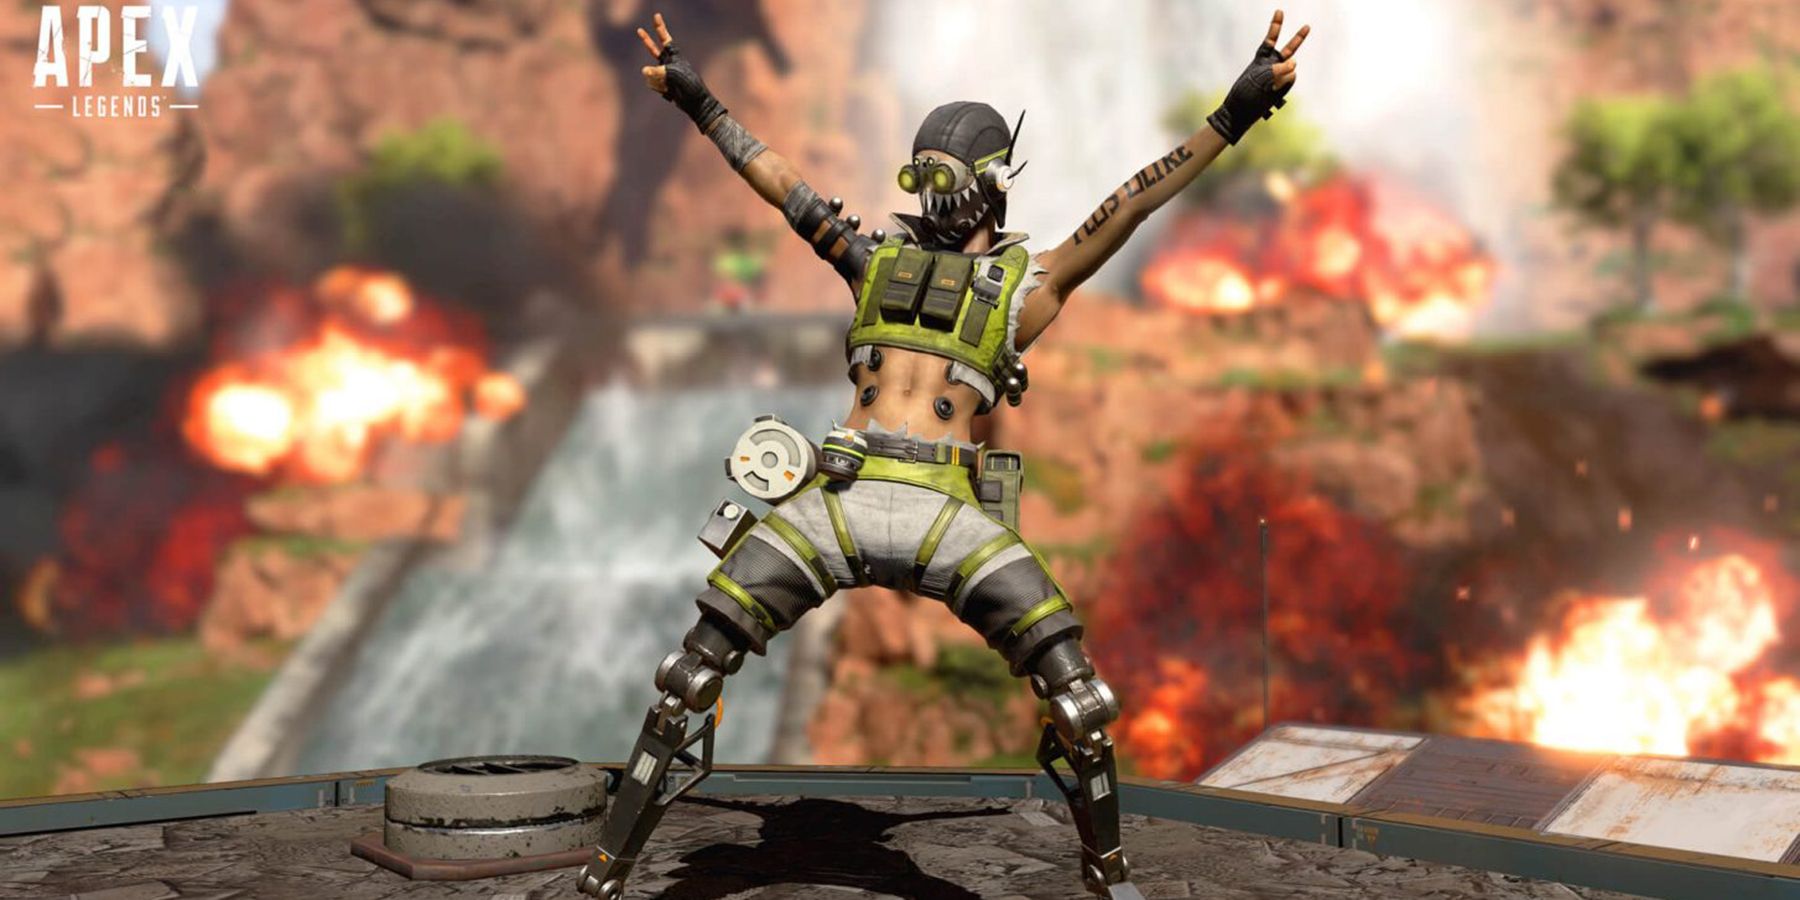 Octane cheering with explosions behind him in Apex Legends